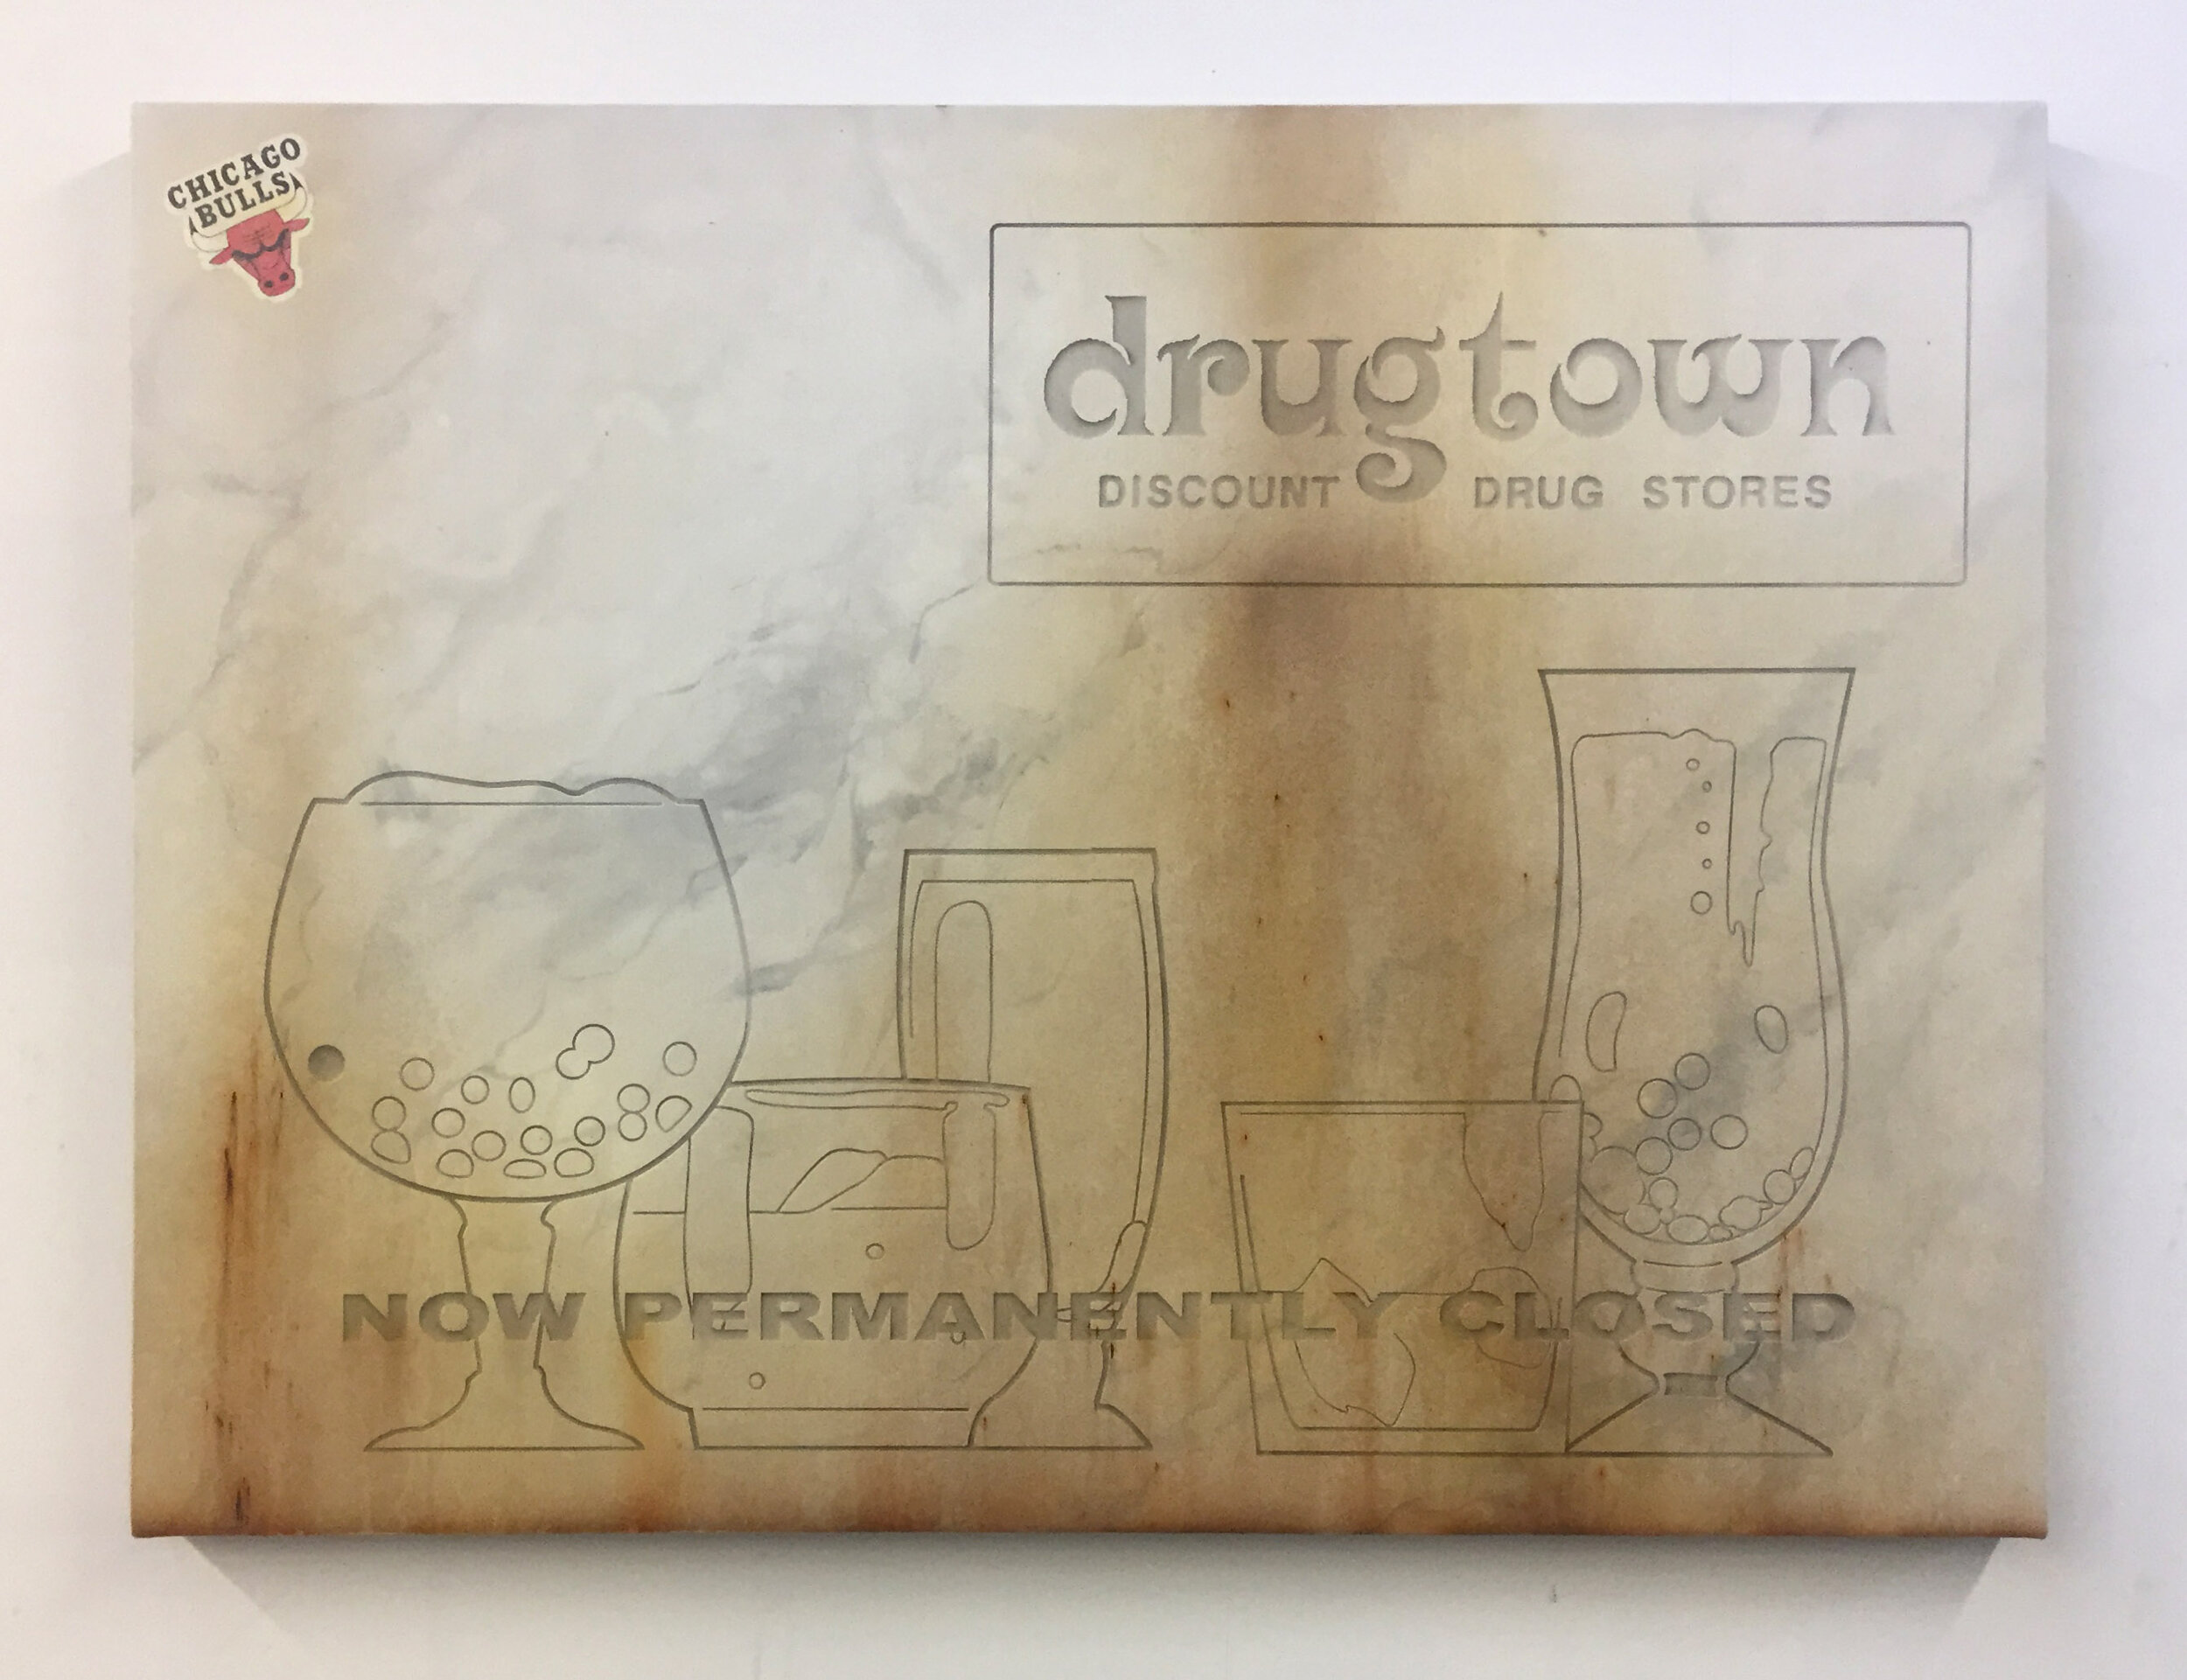   Drugtown in Carrara Marble, 2017.  Acrylic on canvas. 30 x 40 inches 